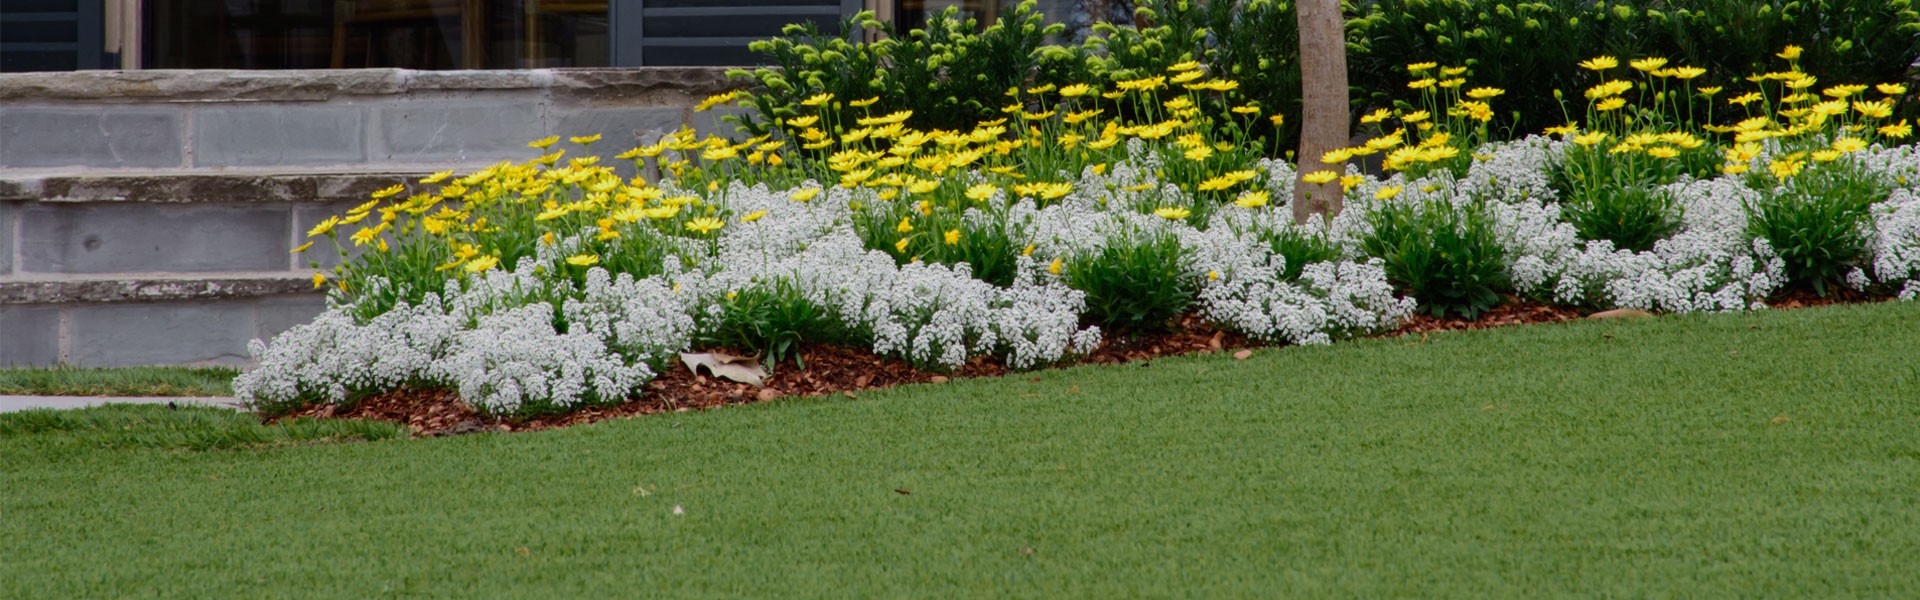 Landscaped lawn with flowers.